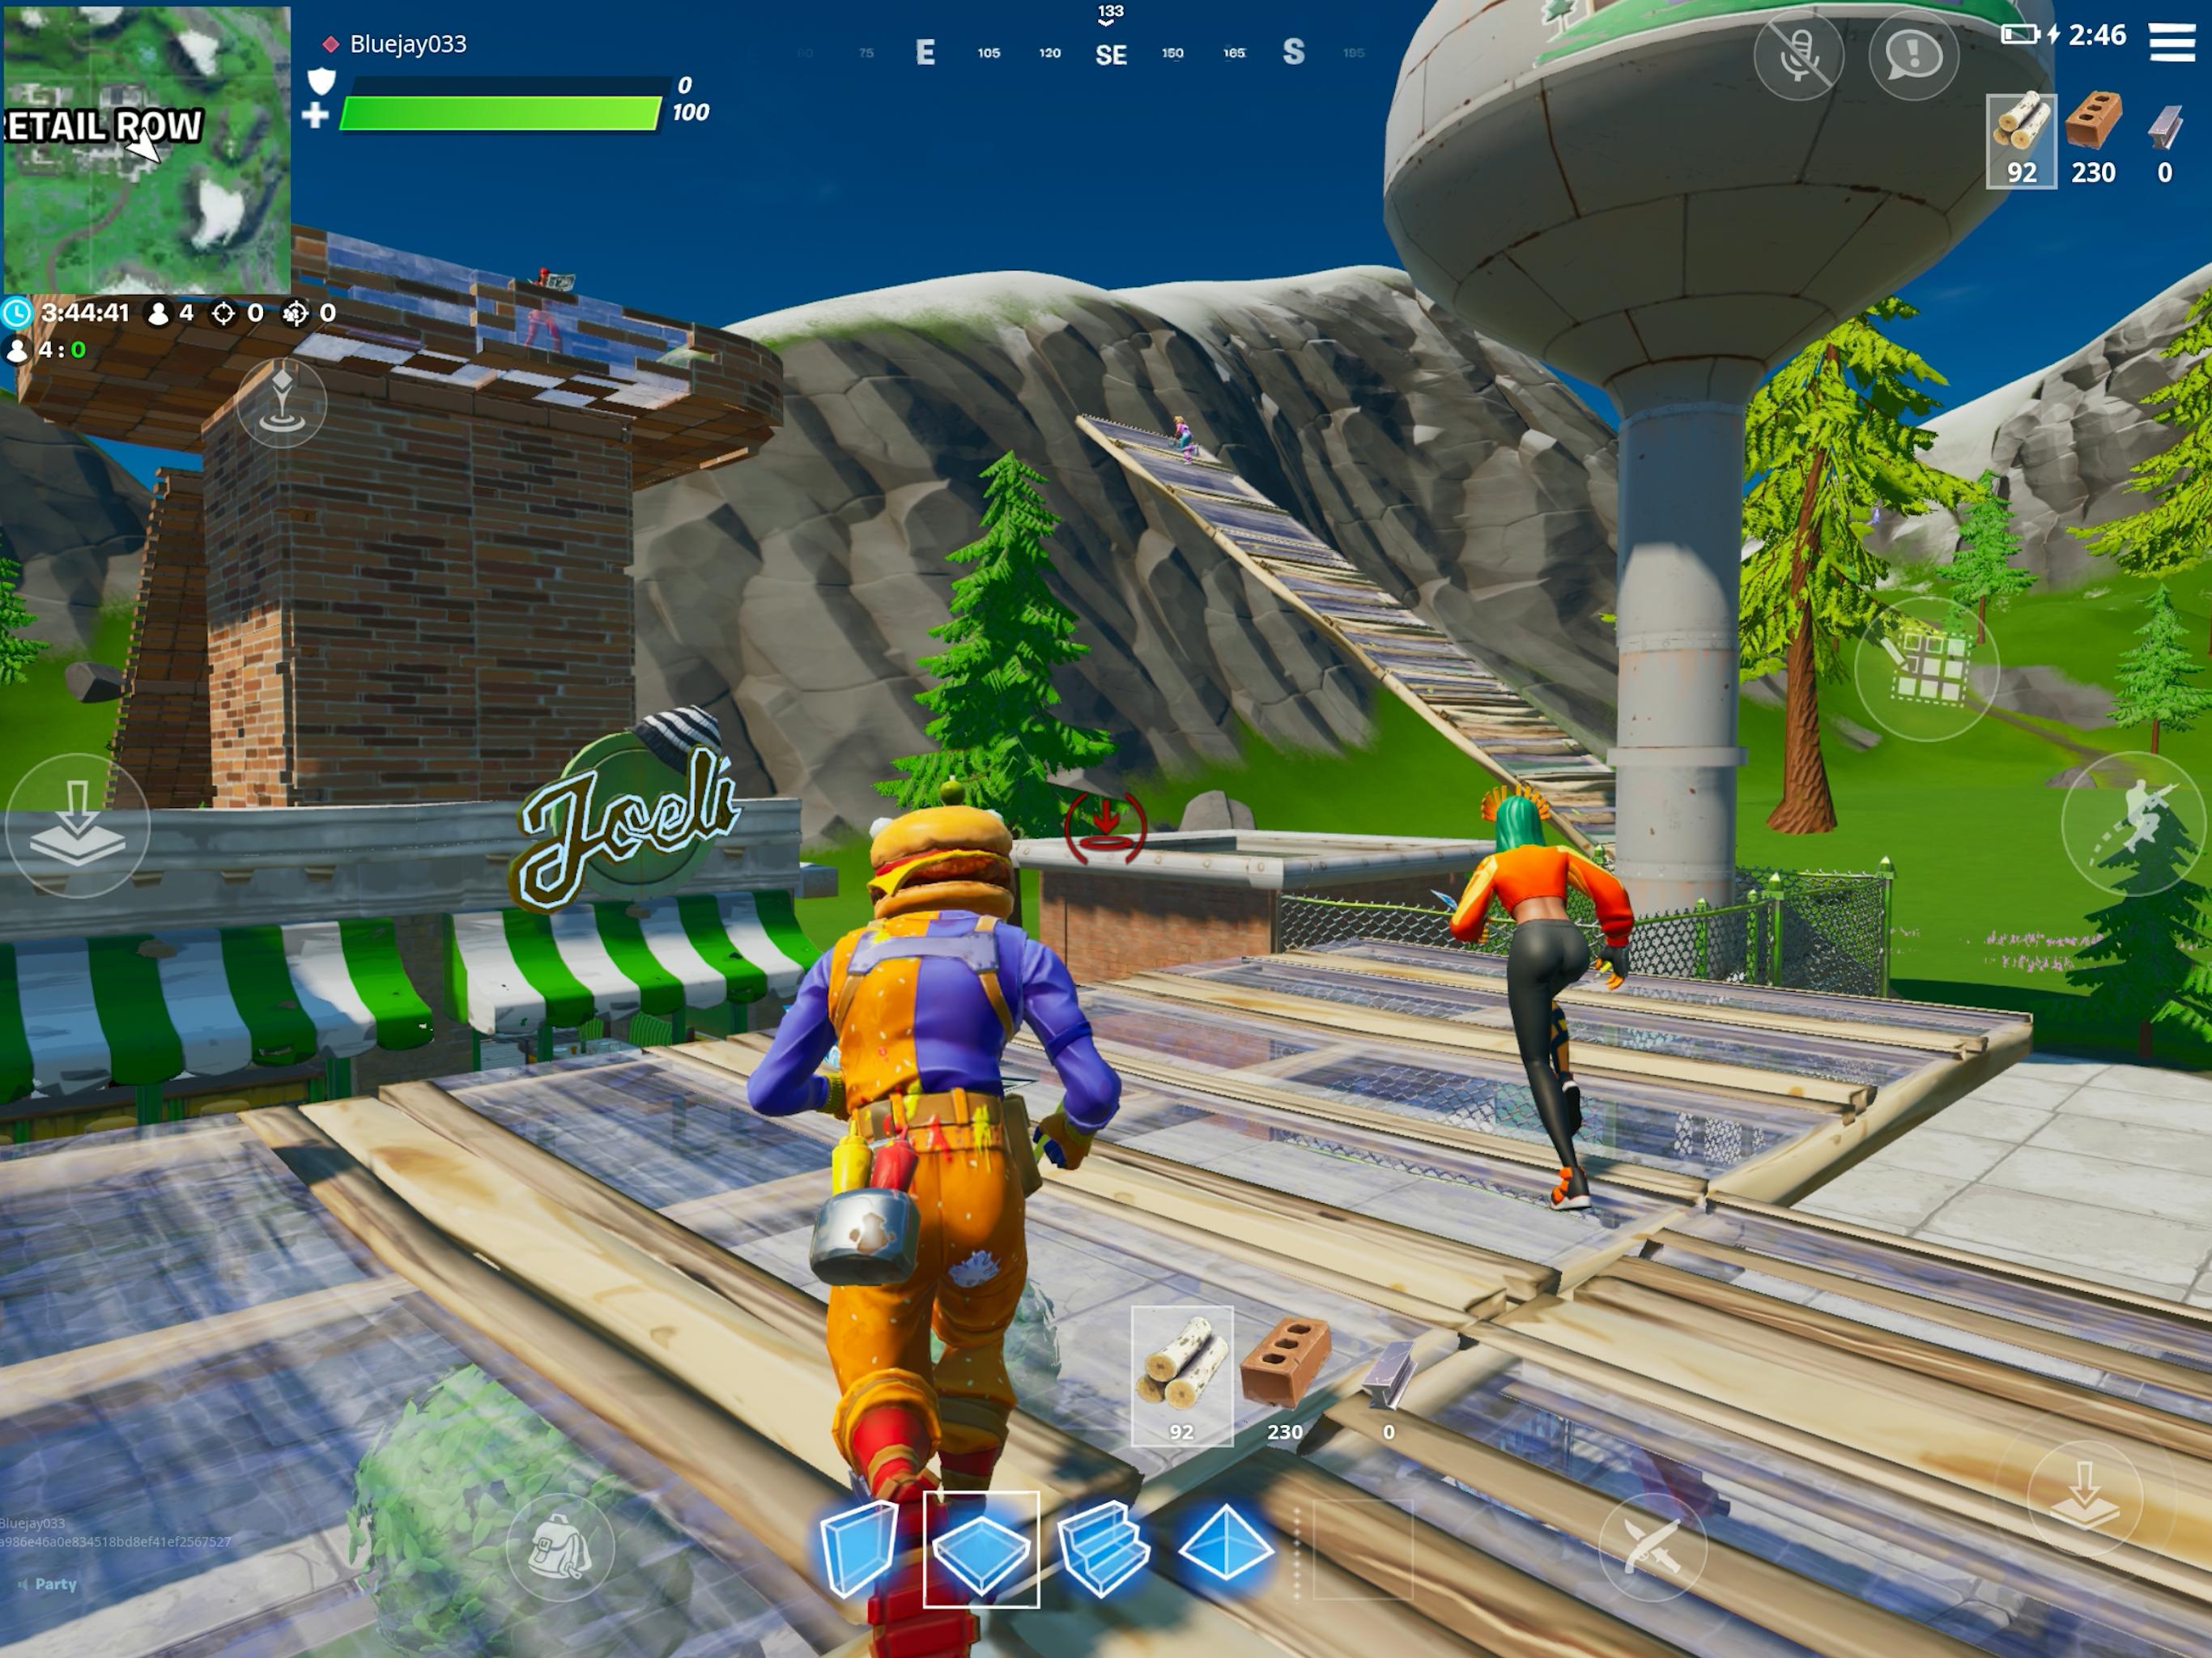 Fortnite For Android Apk Download